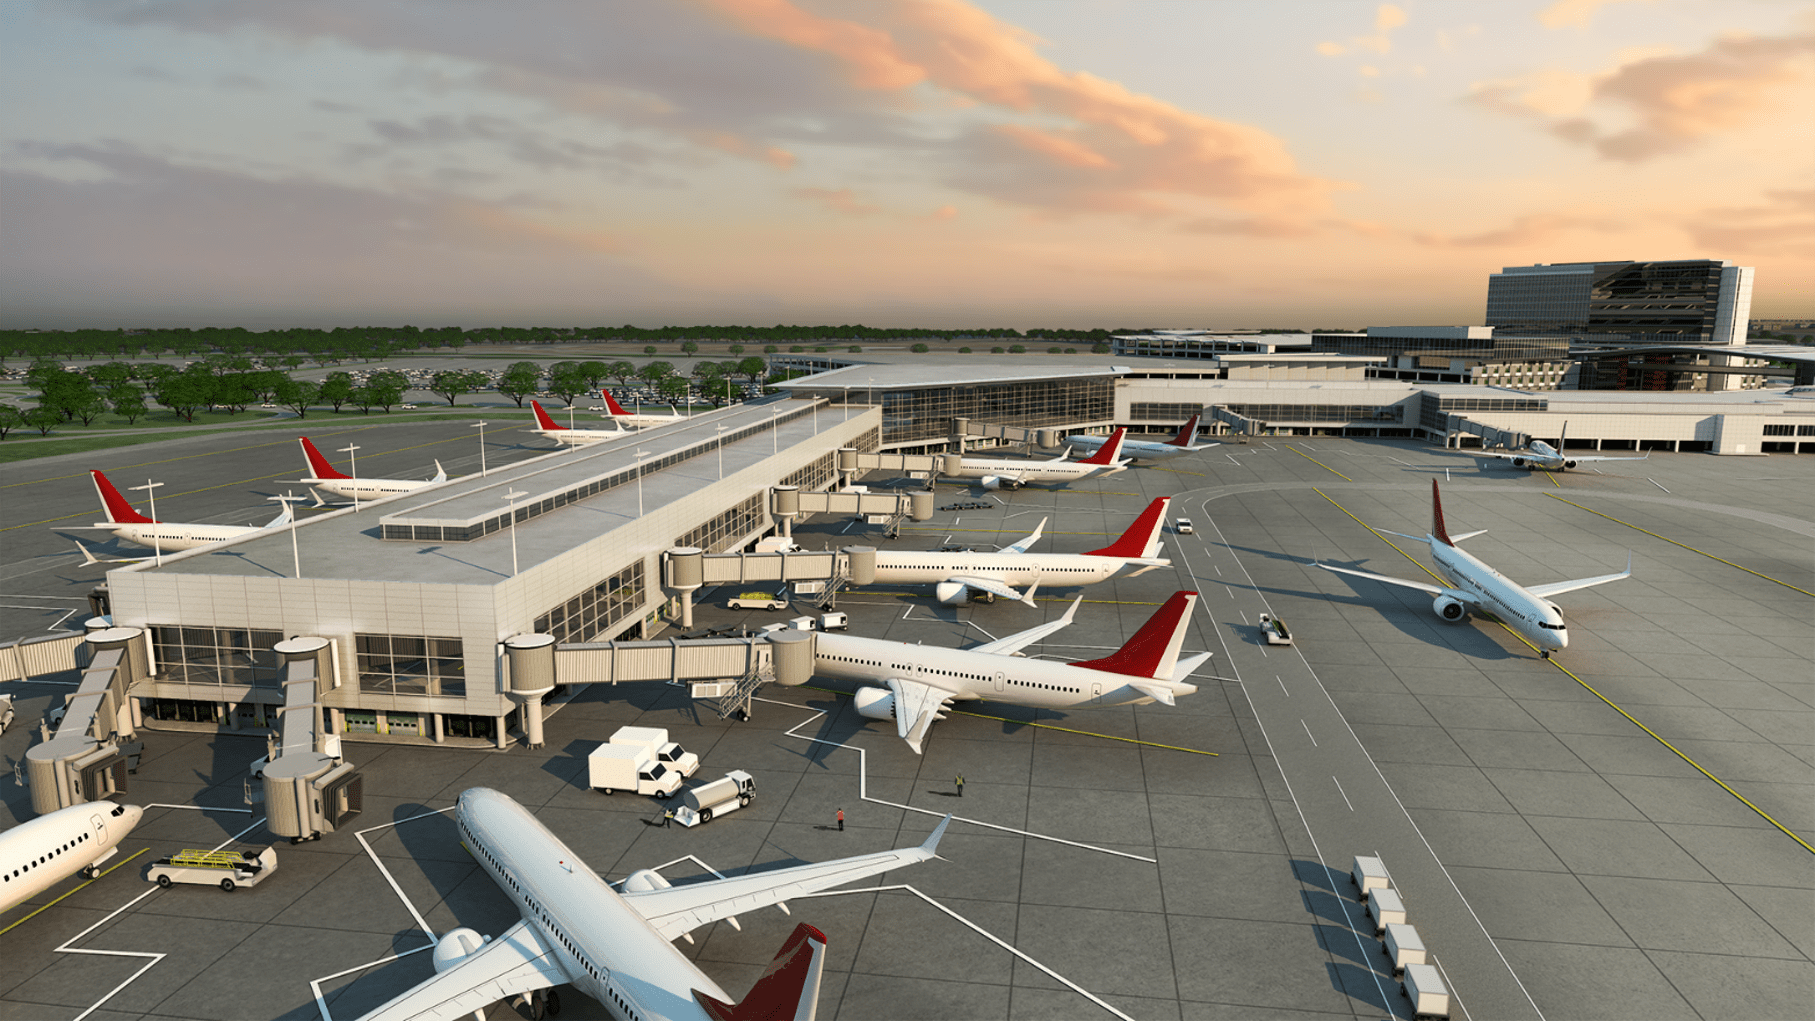 Airport to build new concession area, Transportation